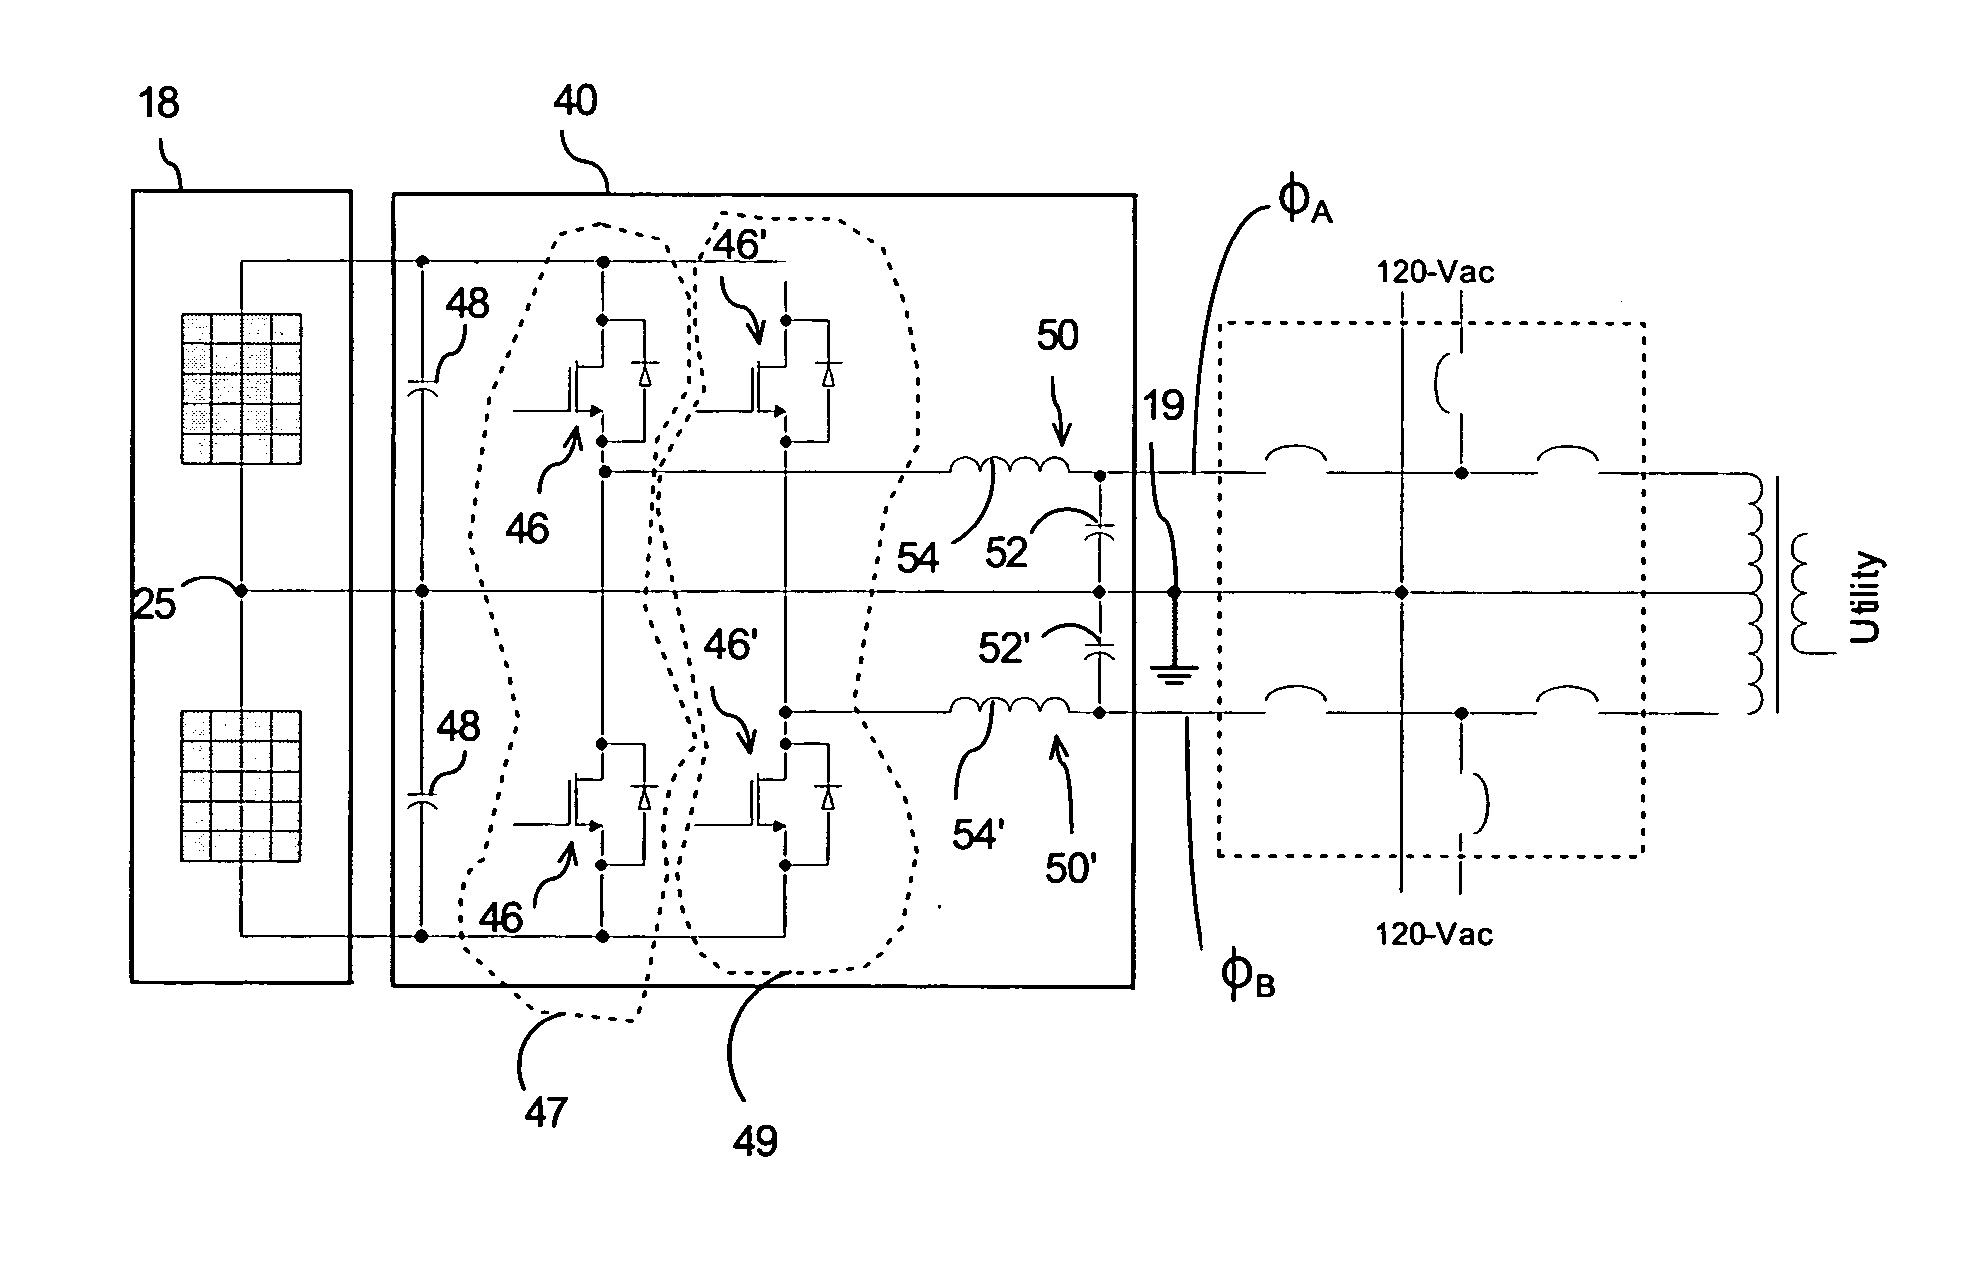 Transformerless power conversion in an inverter for a photovoltaic system